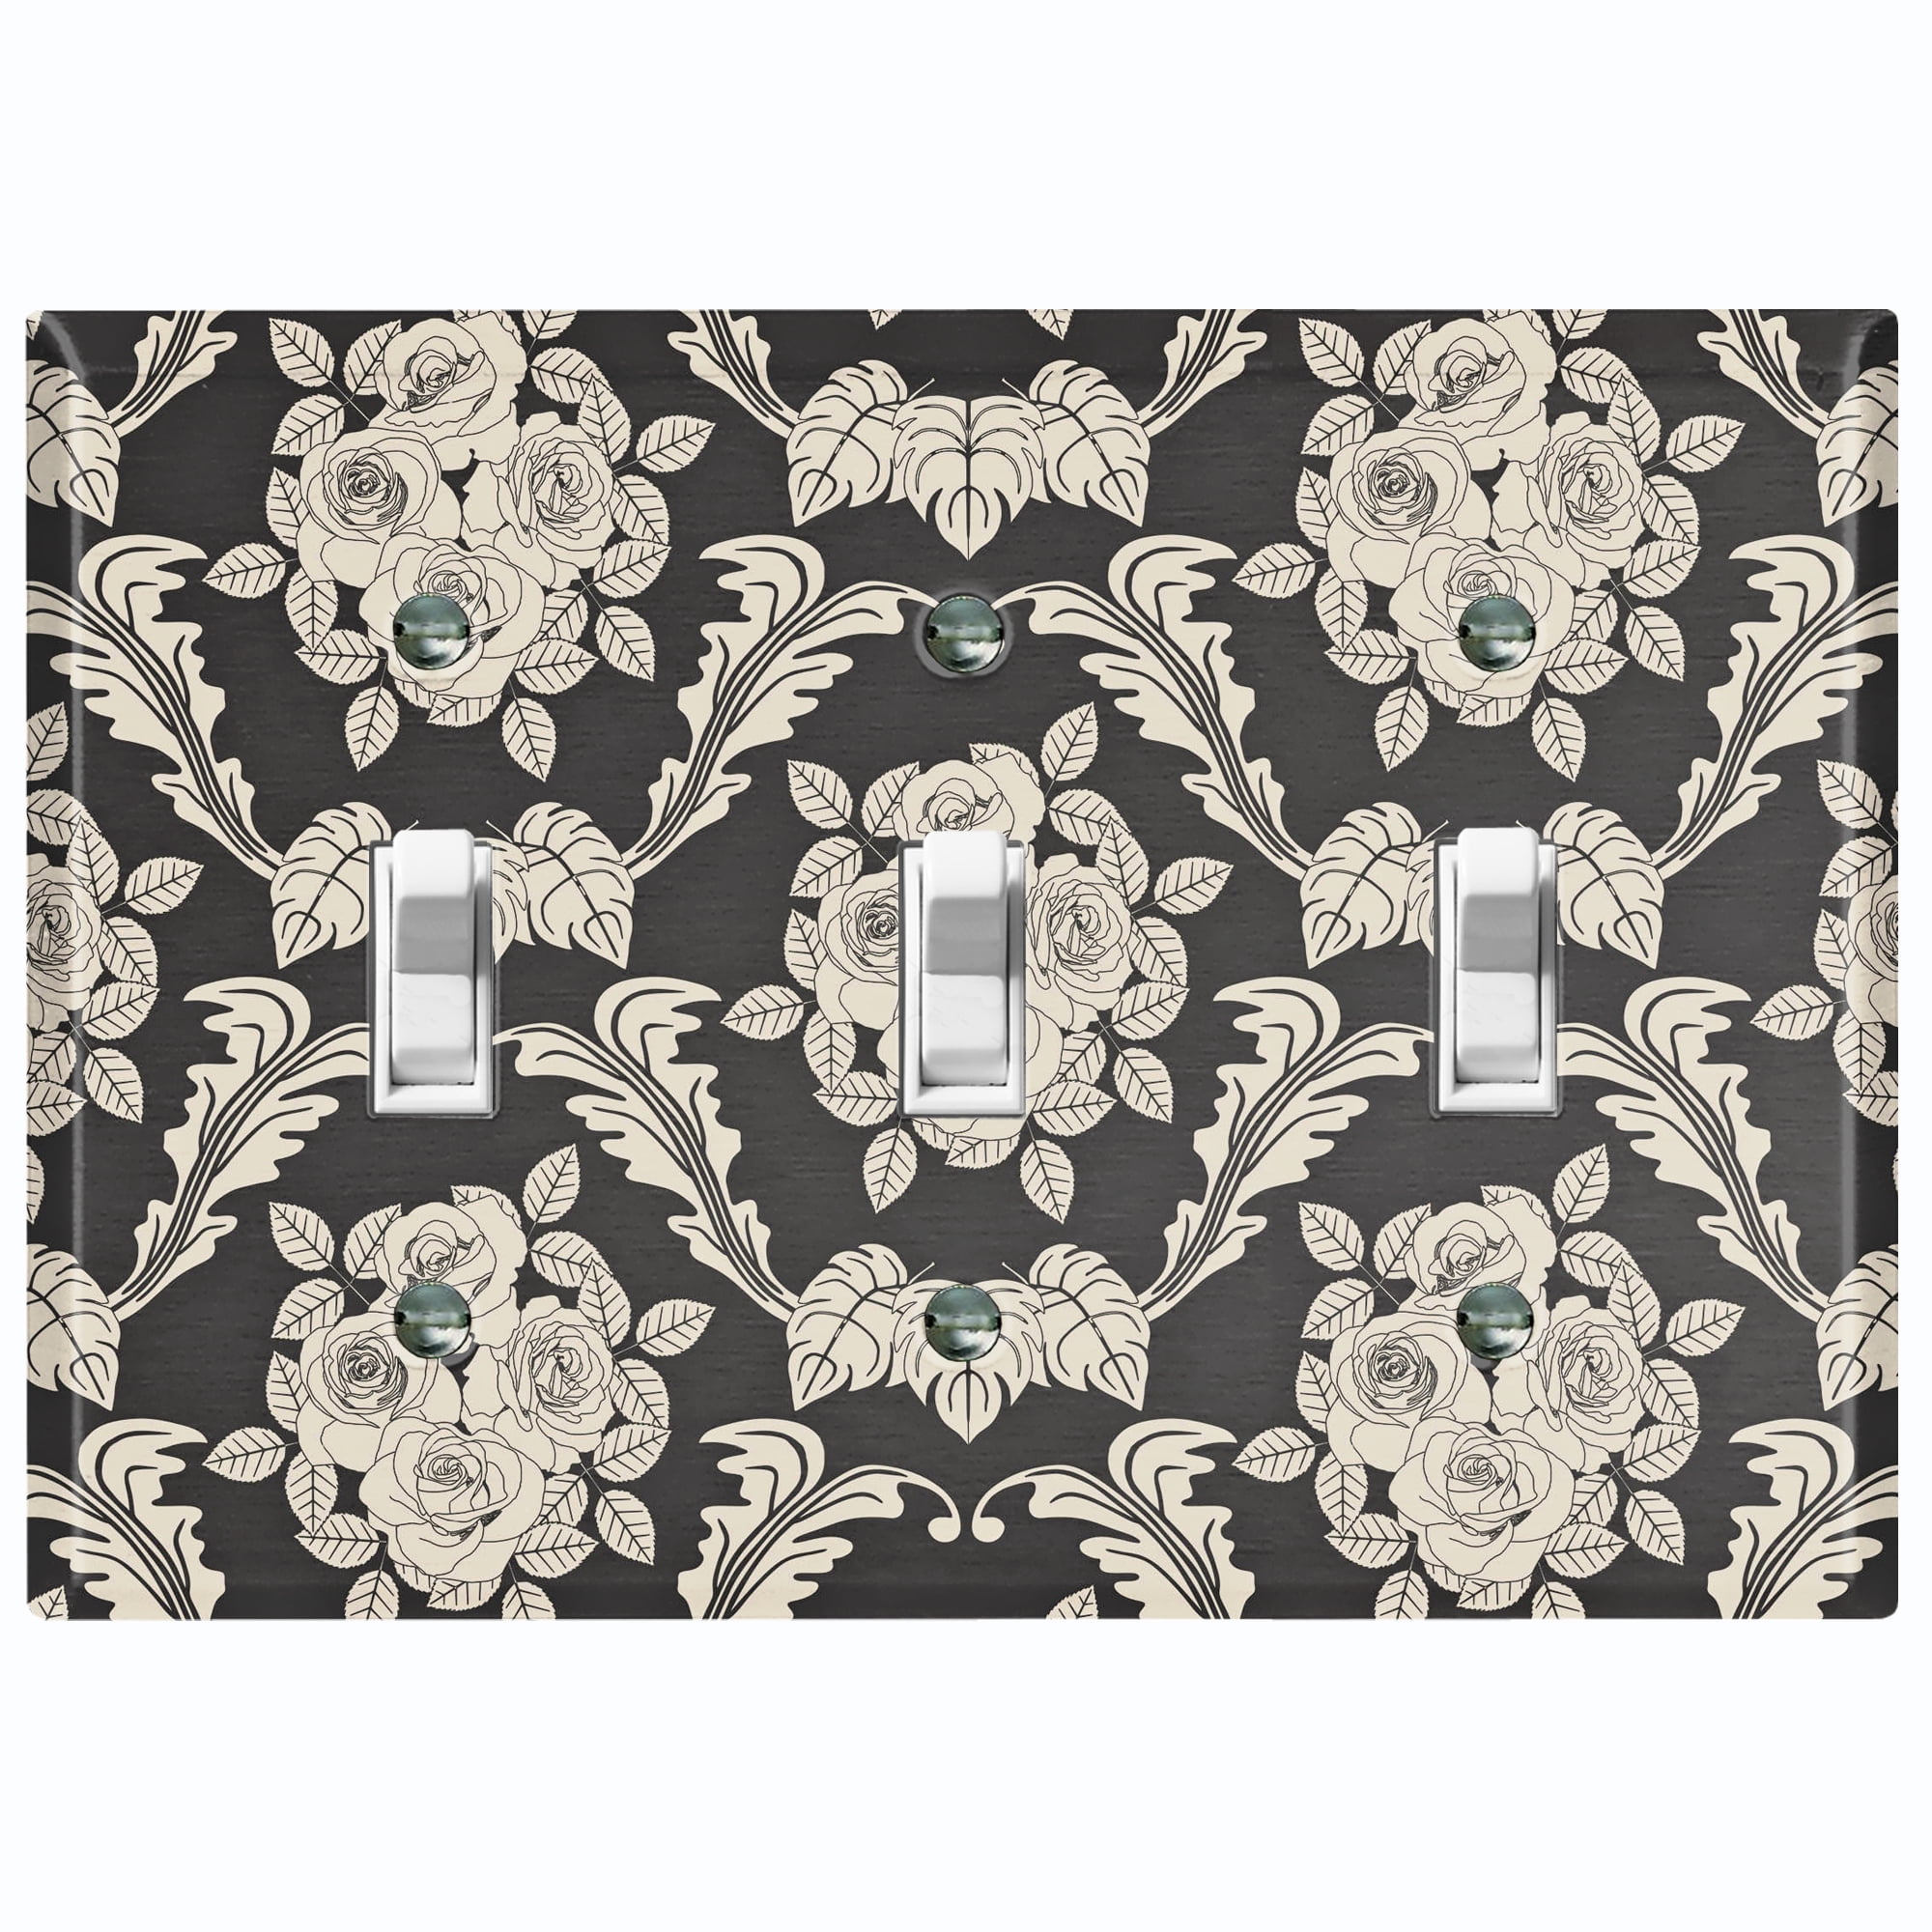 089TR Triple Rocker Light Switch Covers  Switchplate Switch Plate in Black and Tan Damask